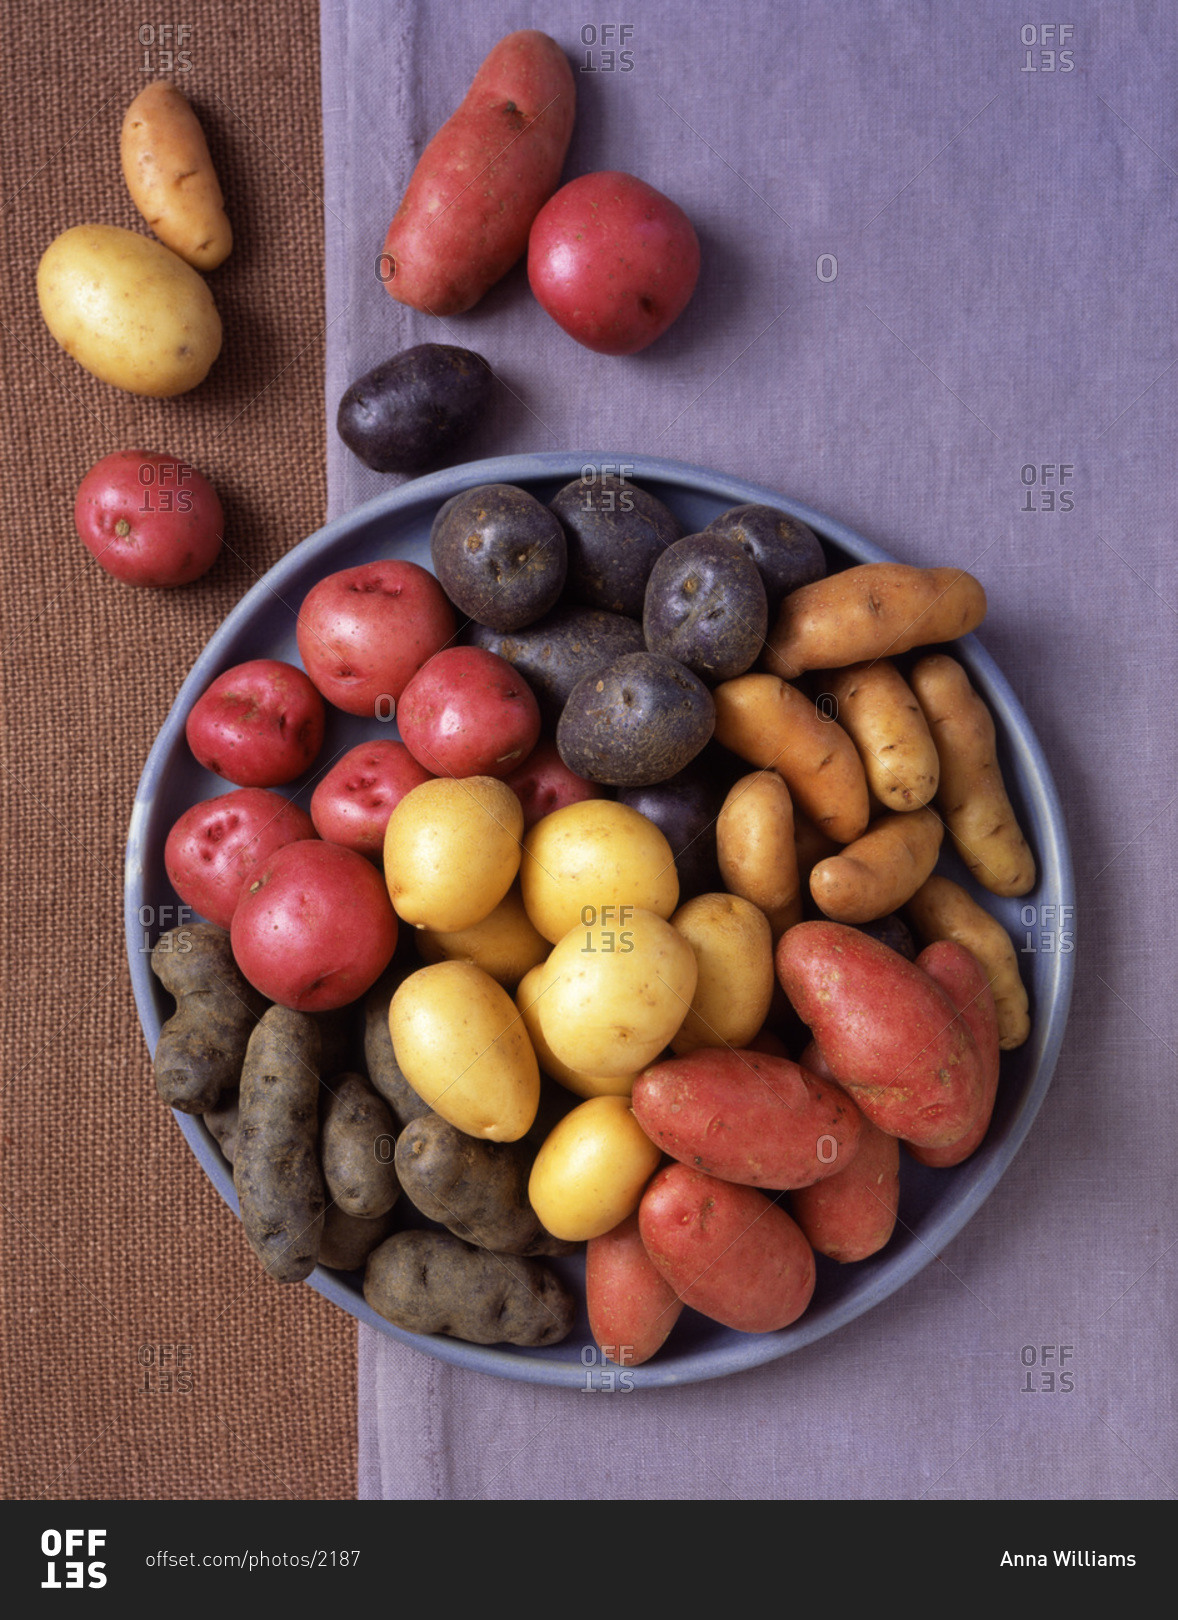 Different types of potato from above on a purple tablecloth